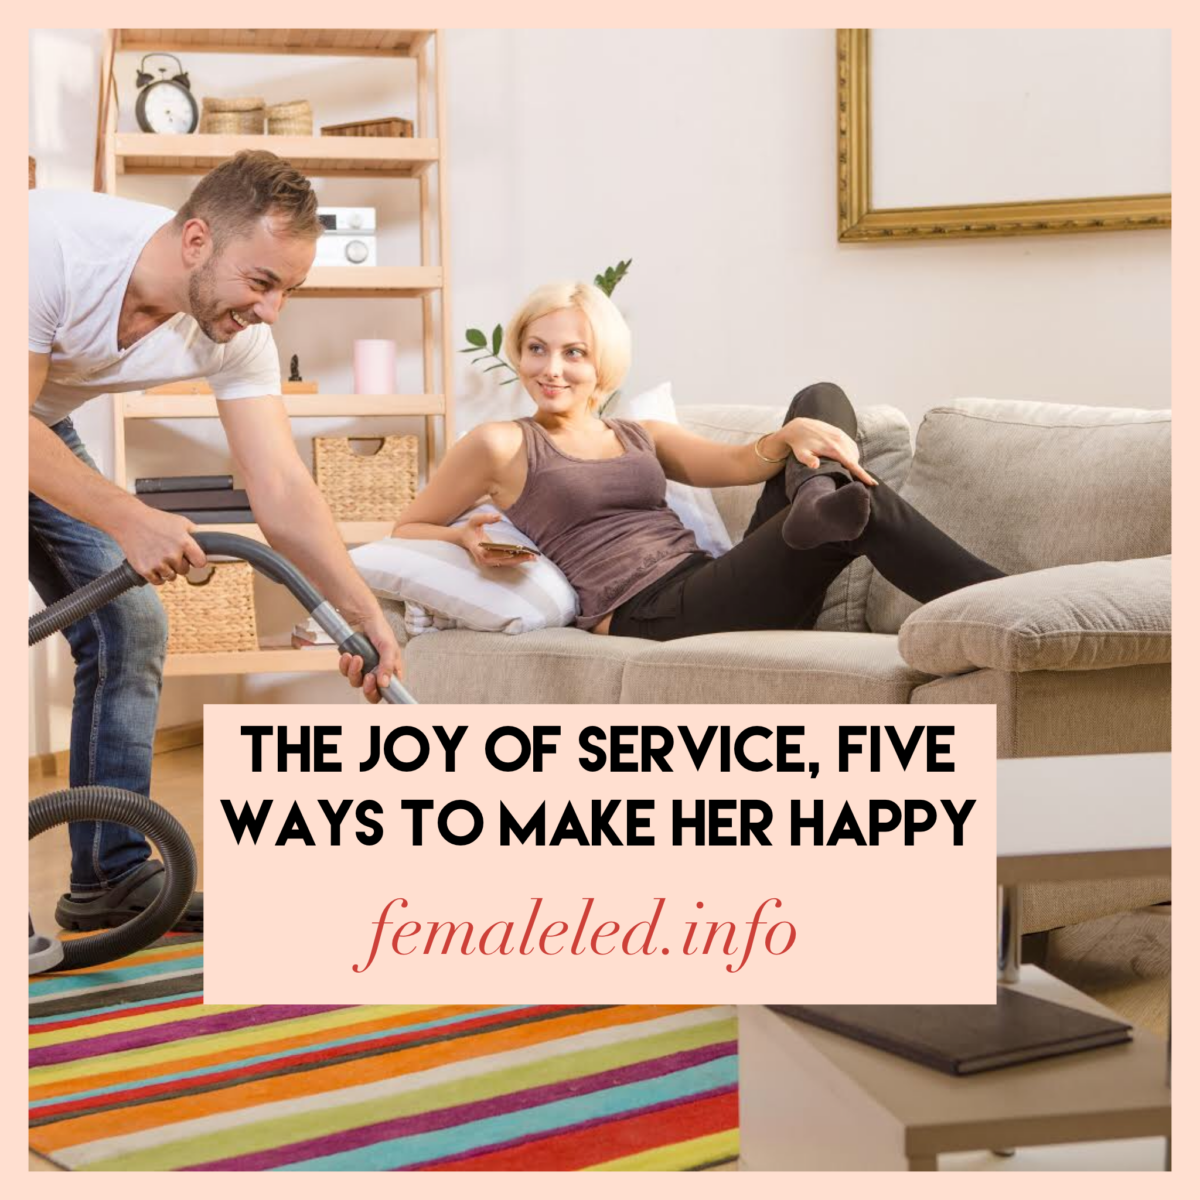 The joy of service, five ways to make the woman in your life happy